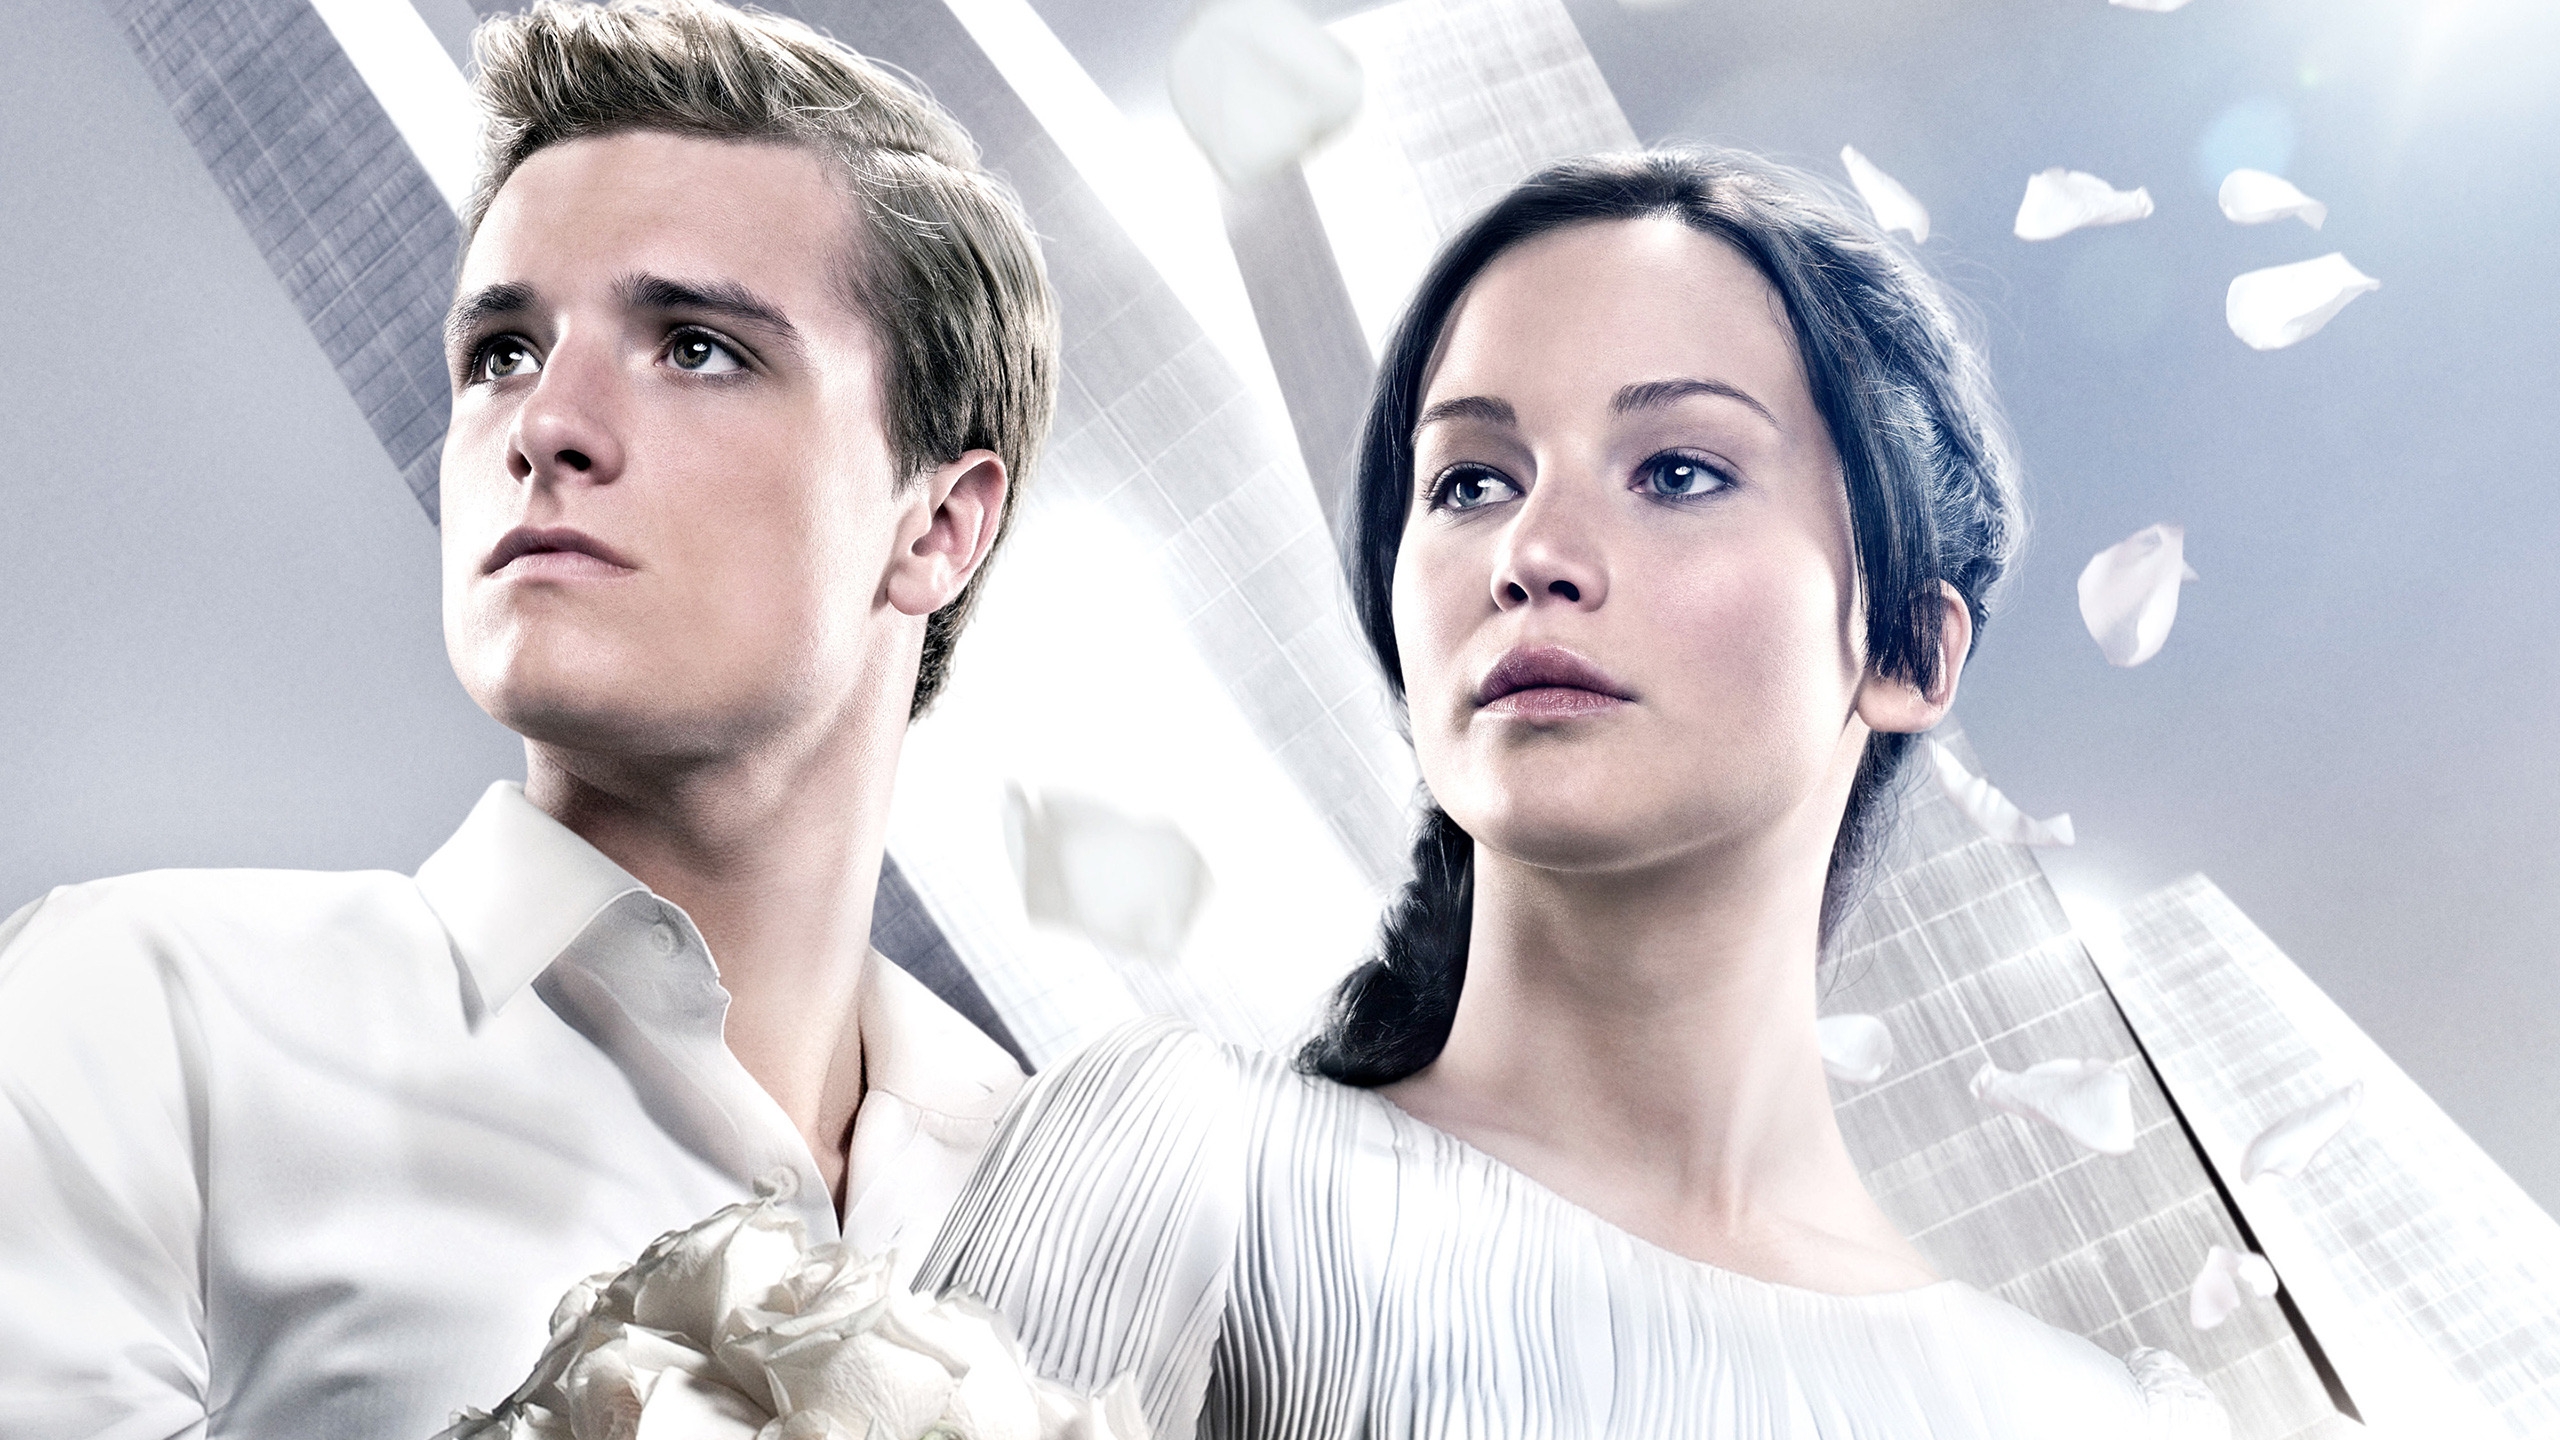 The Hunger Games Catching Fire for 2560x1440 HDTV resolution